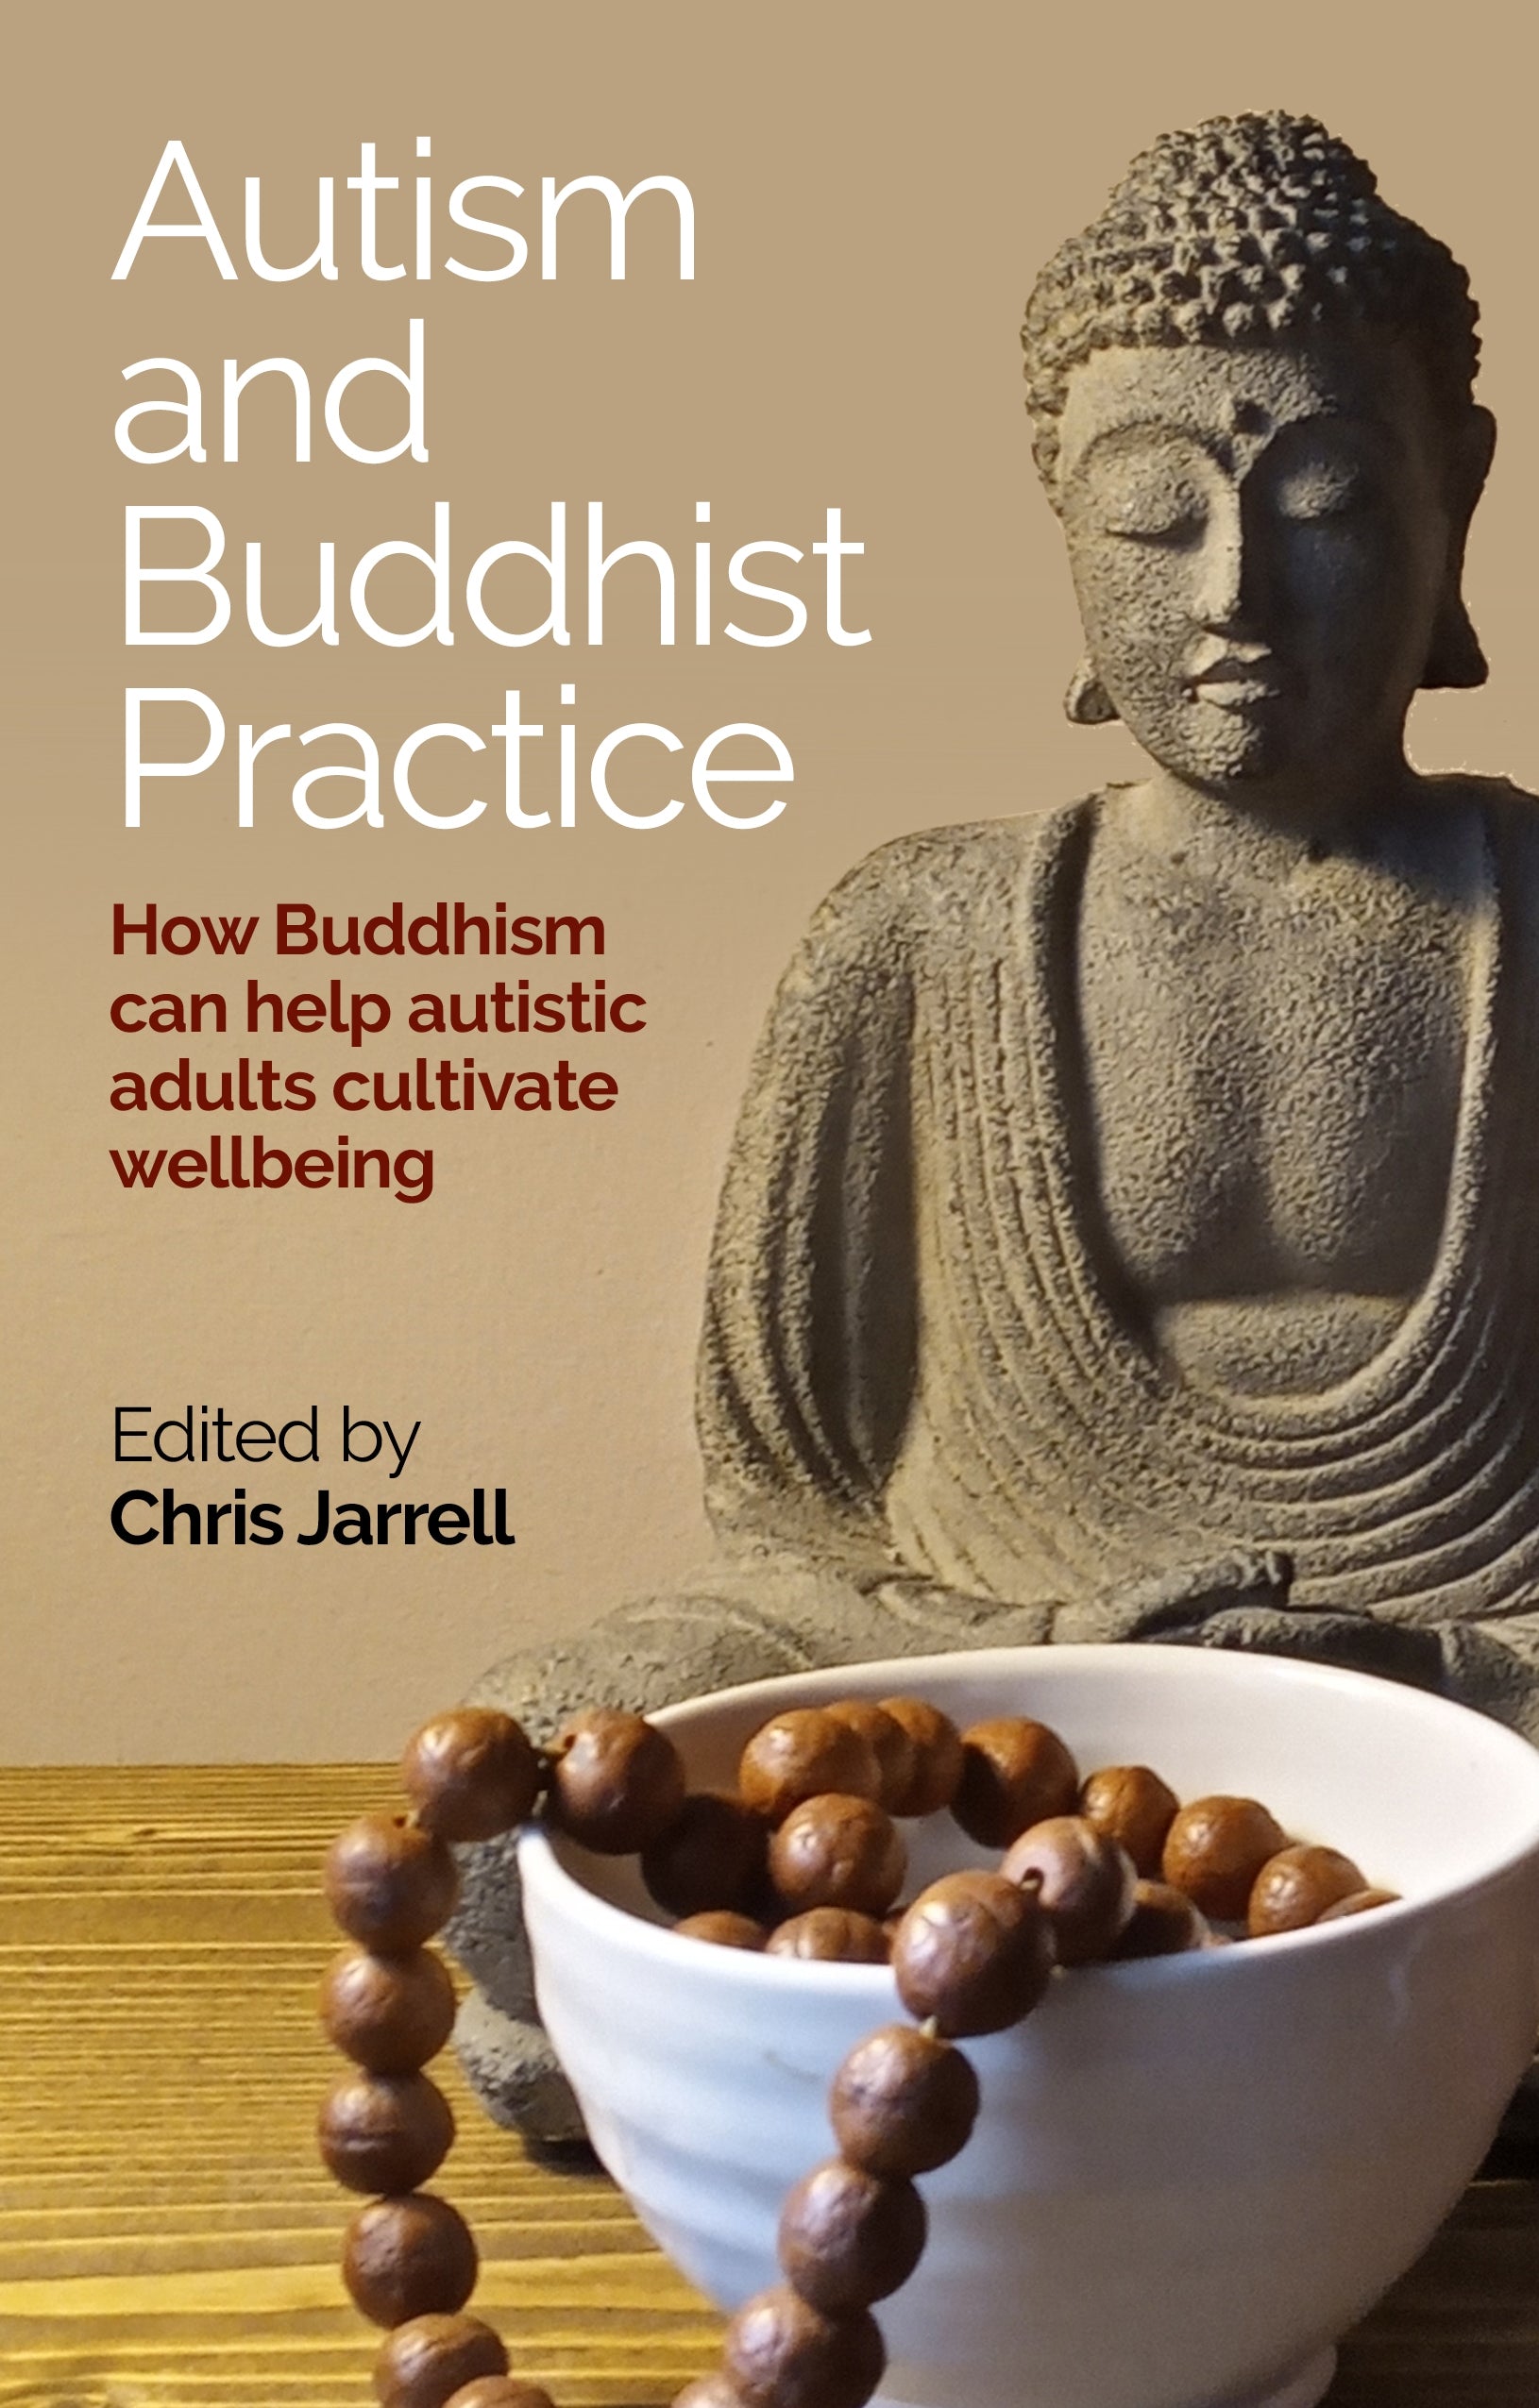 Autism and Buddhist Practice by Chris Jarrell, No Author Listed